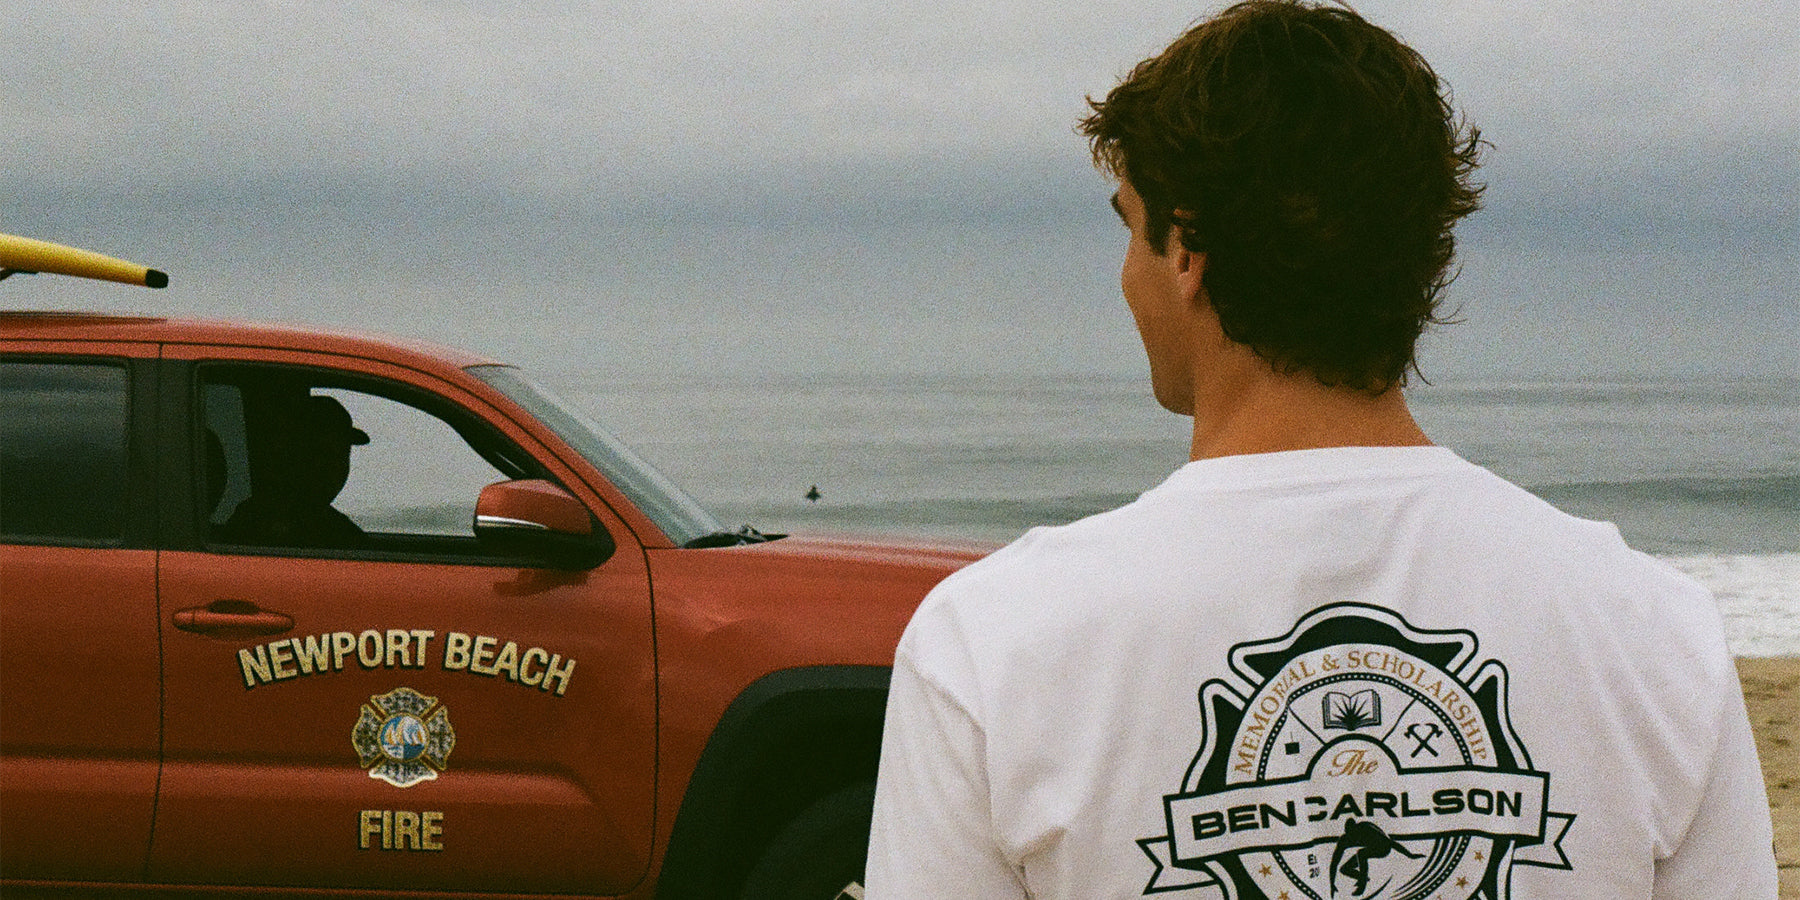 Ben Carlson standing in front of a red truck owned by the Newport Beach Lifeguards.